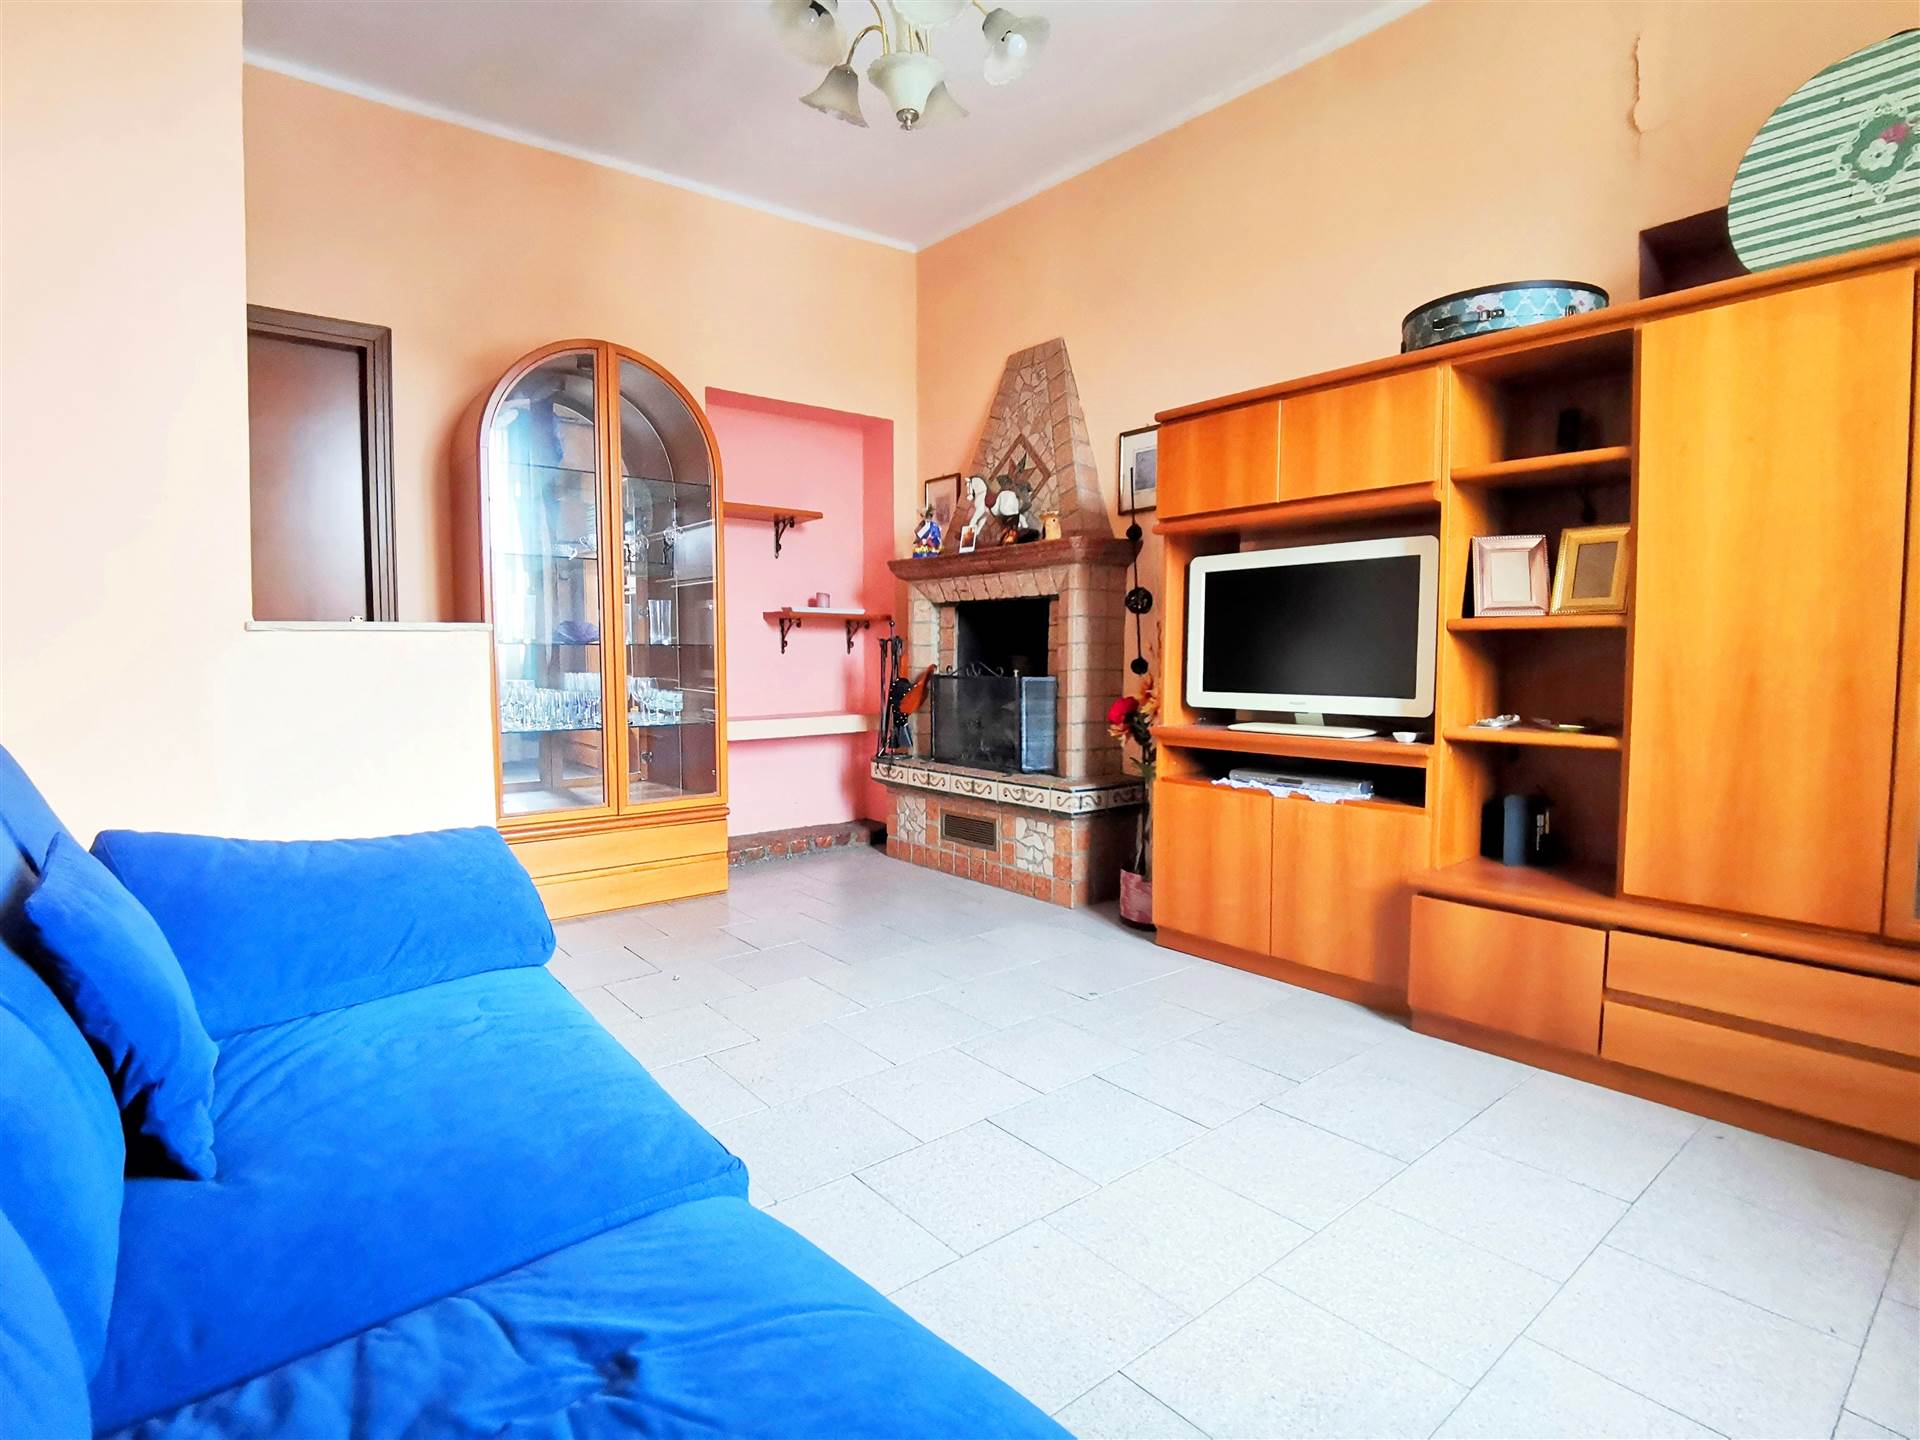 VERANO BRIANZA, Apartment for sale of 75 Sq. mt., Good condition, Heating Individual heating system, Energetic class: G, Epi: 226 kwh/m2 year, placed 